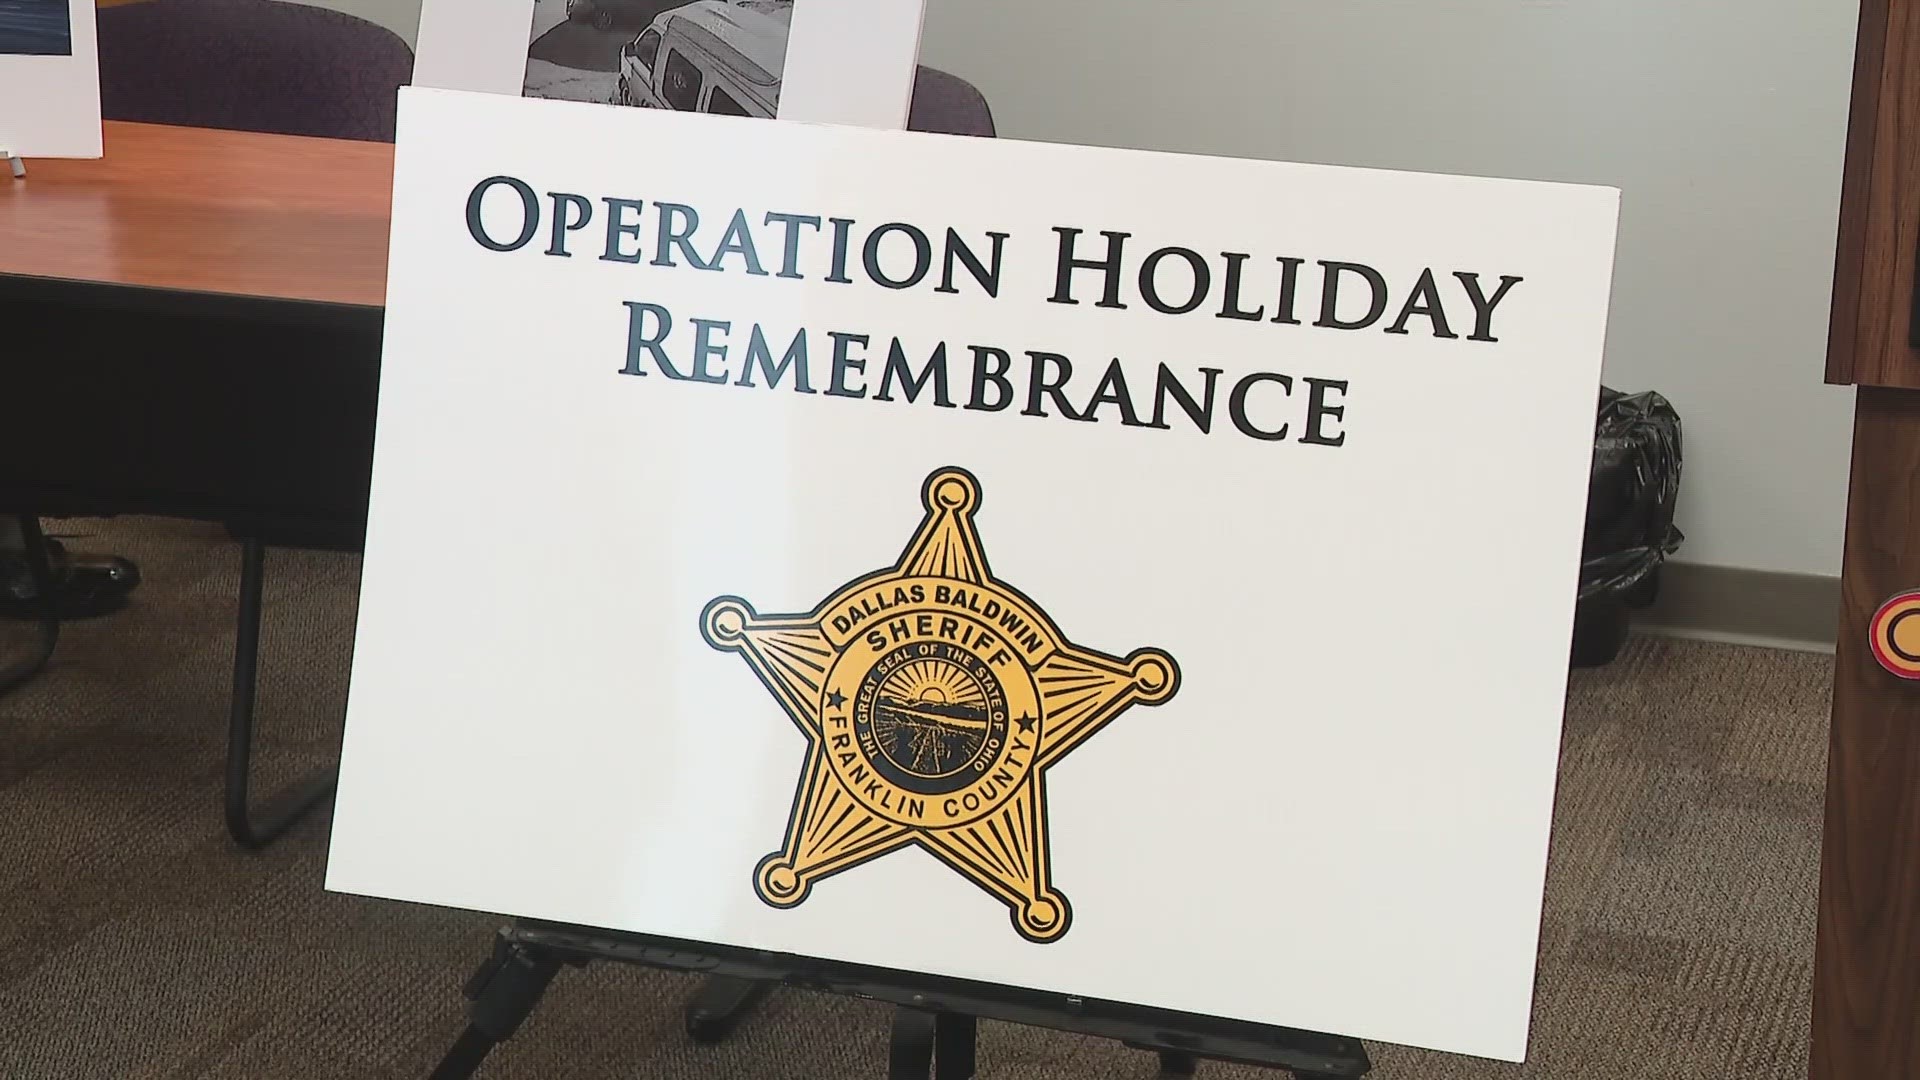 Dubbed "Operation Holiday Remembrance," Sheriff Dallas Baldwin said the agency wanted to bring awareness to four hit-skip crashes within the last two years.